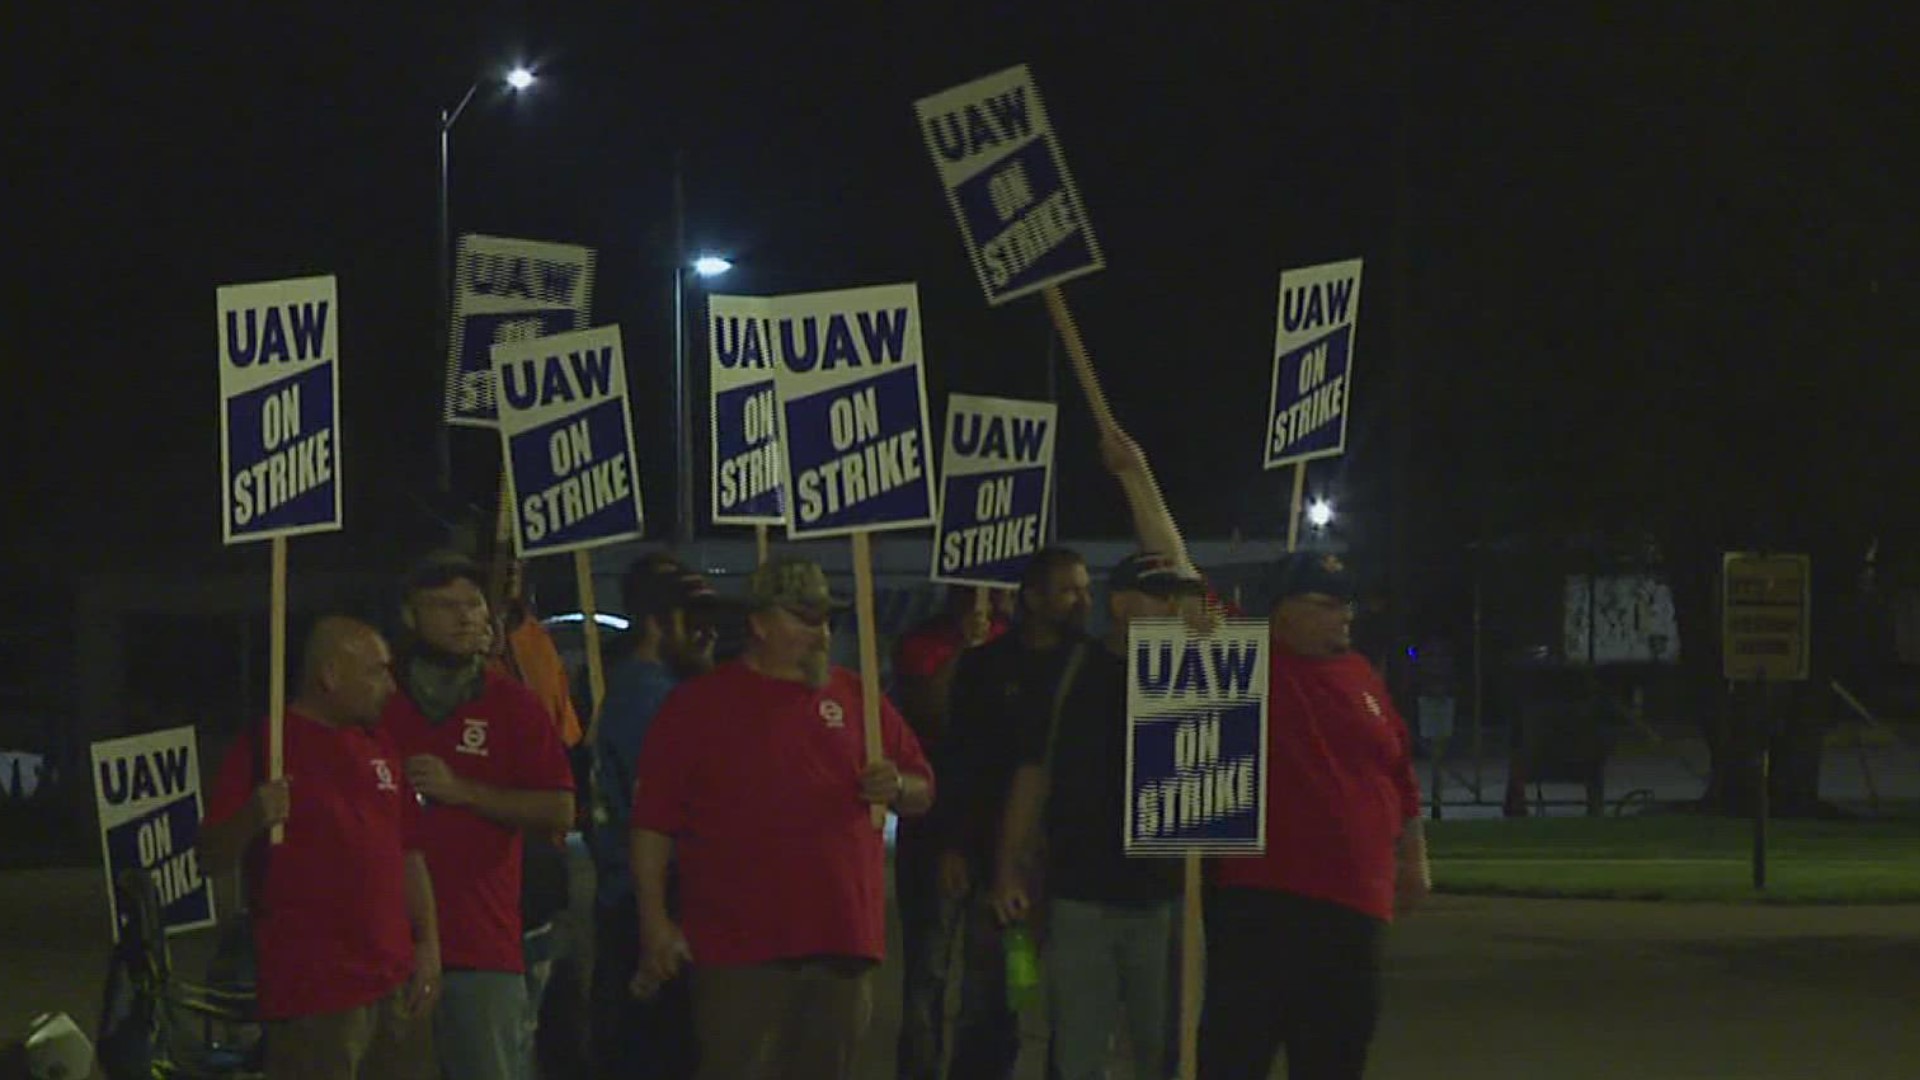 A UAW worker said union members will be out on the picket line as long as it's needed. About 10,000 union workers were affected.